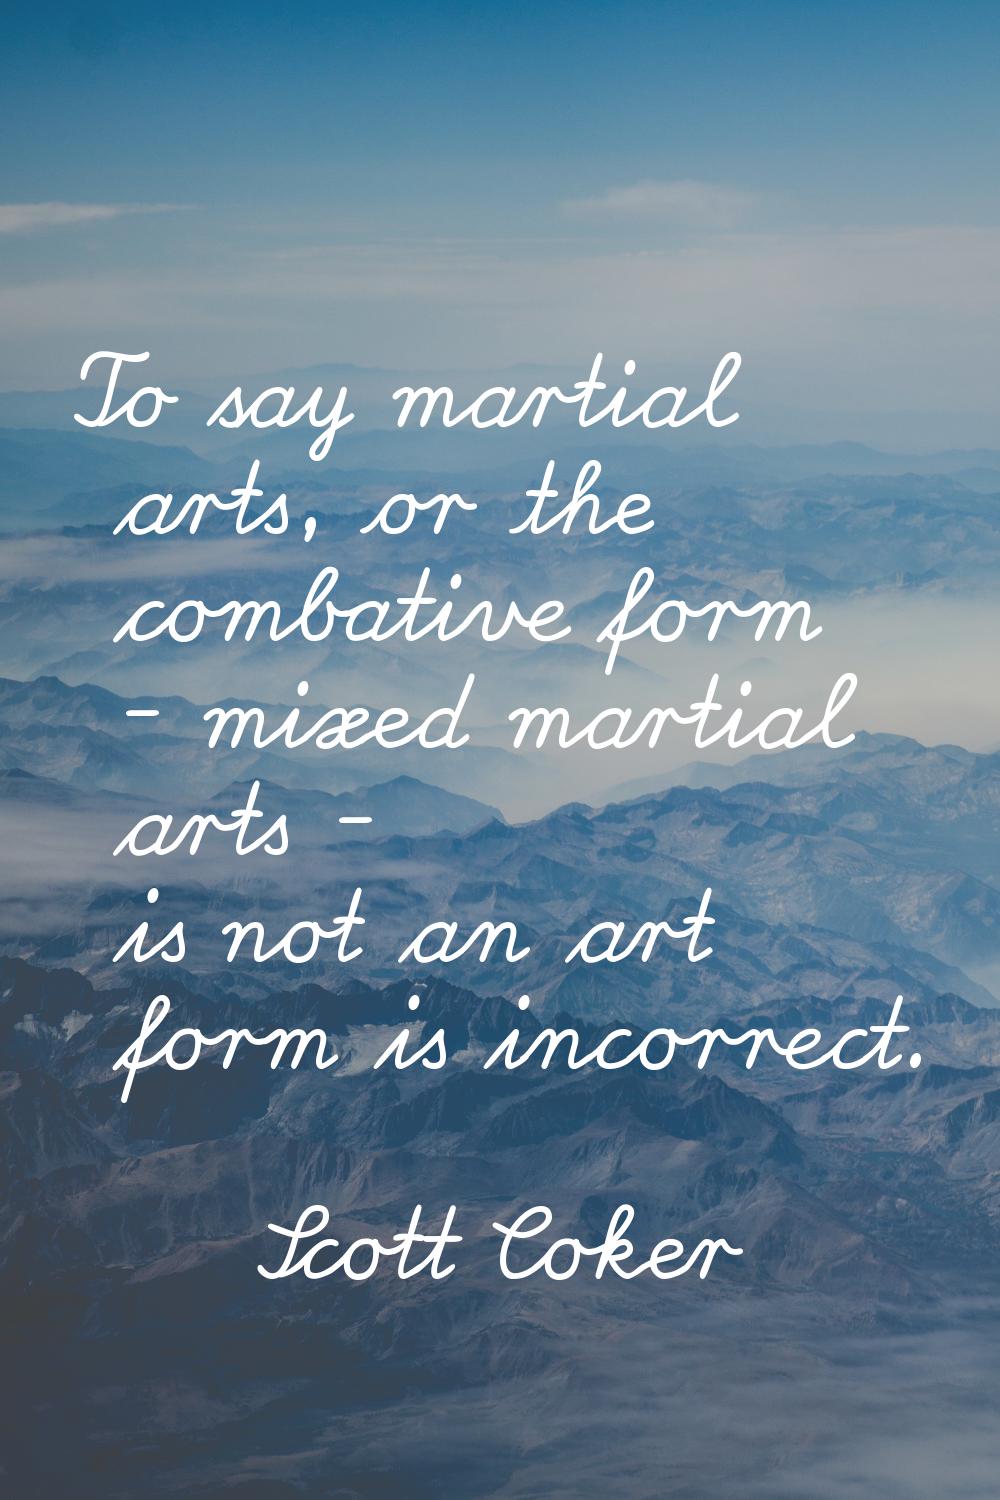 To say martial arts, or the combative form - mixed martial arts - is not an art form is incorrect.